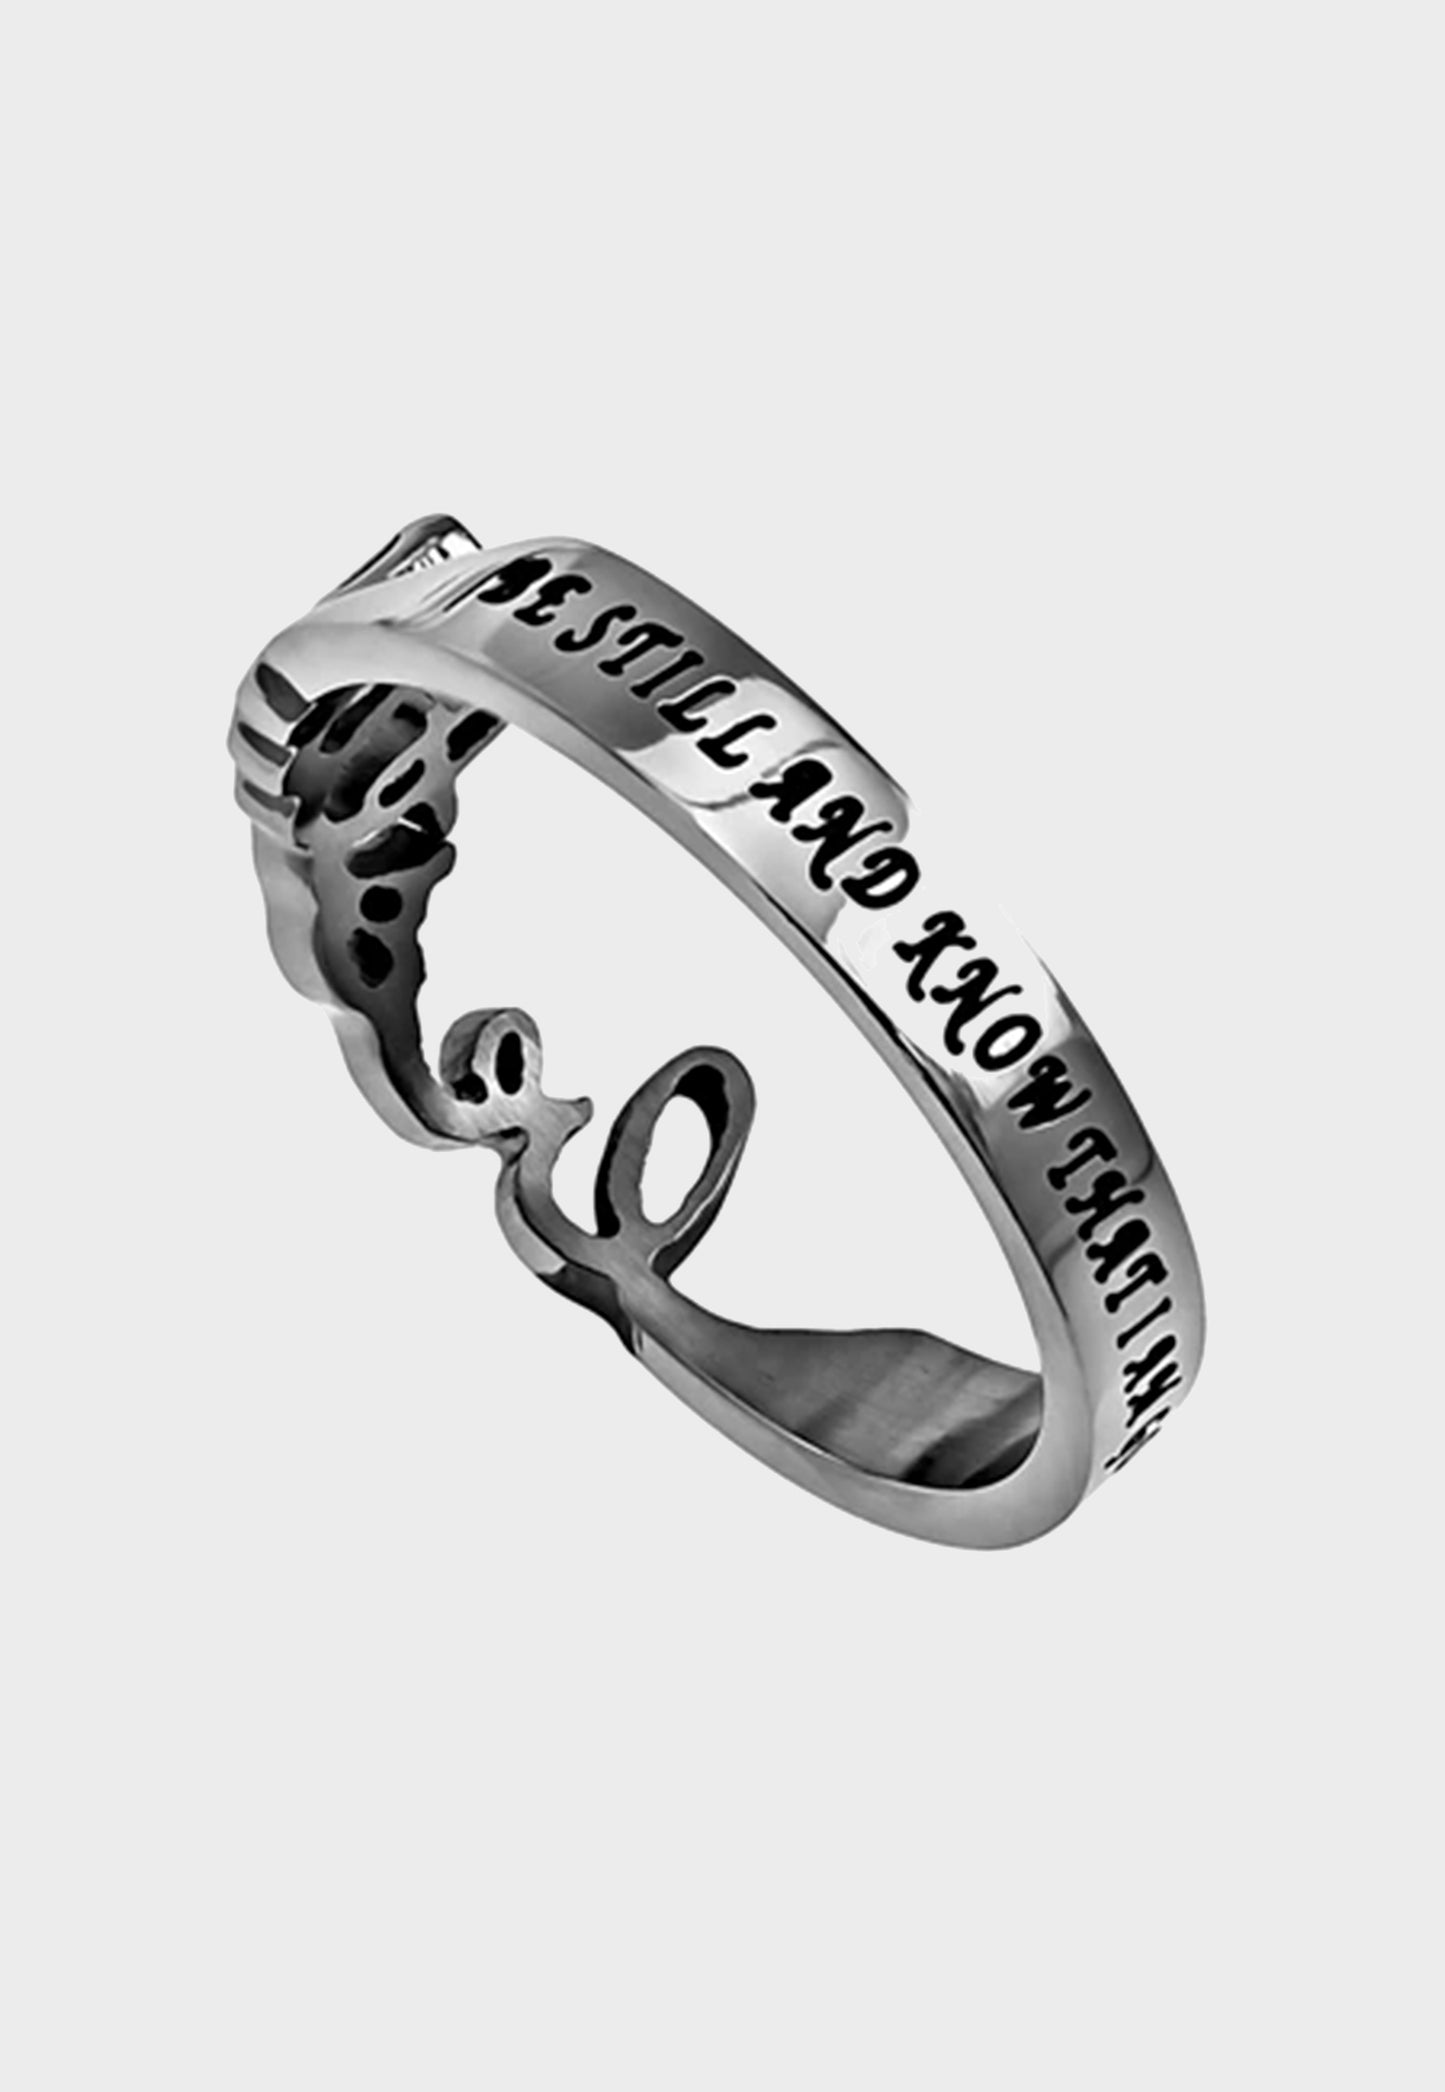 Be Still and know that I am God inscribed on women's ring